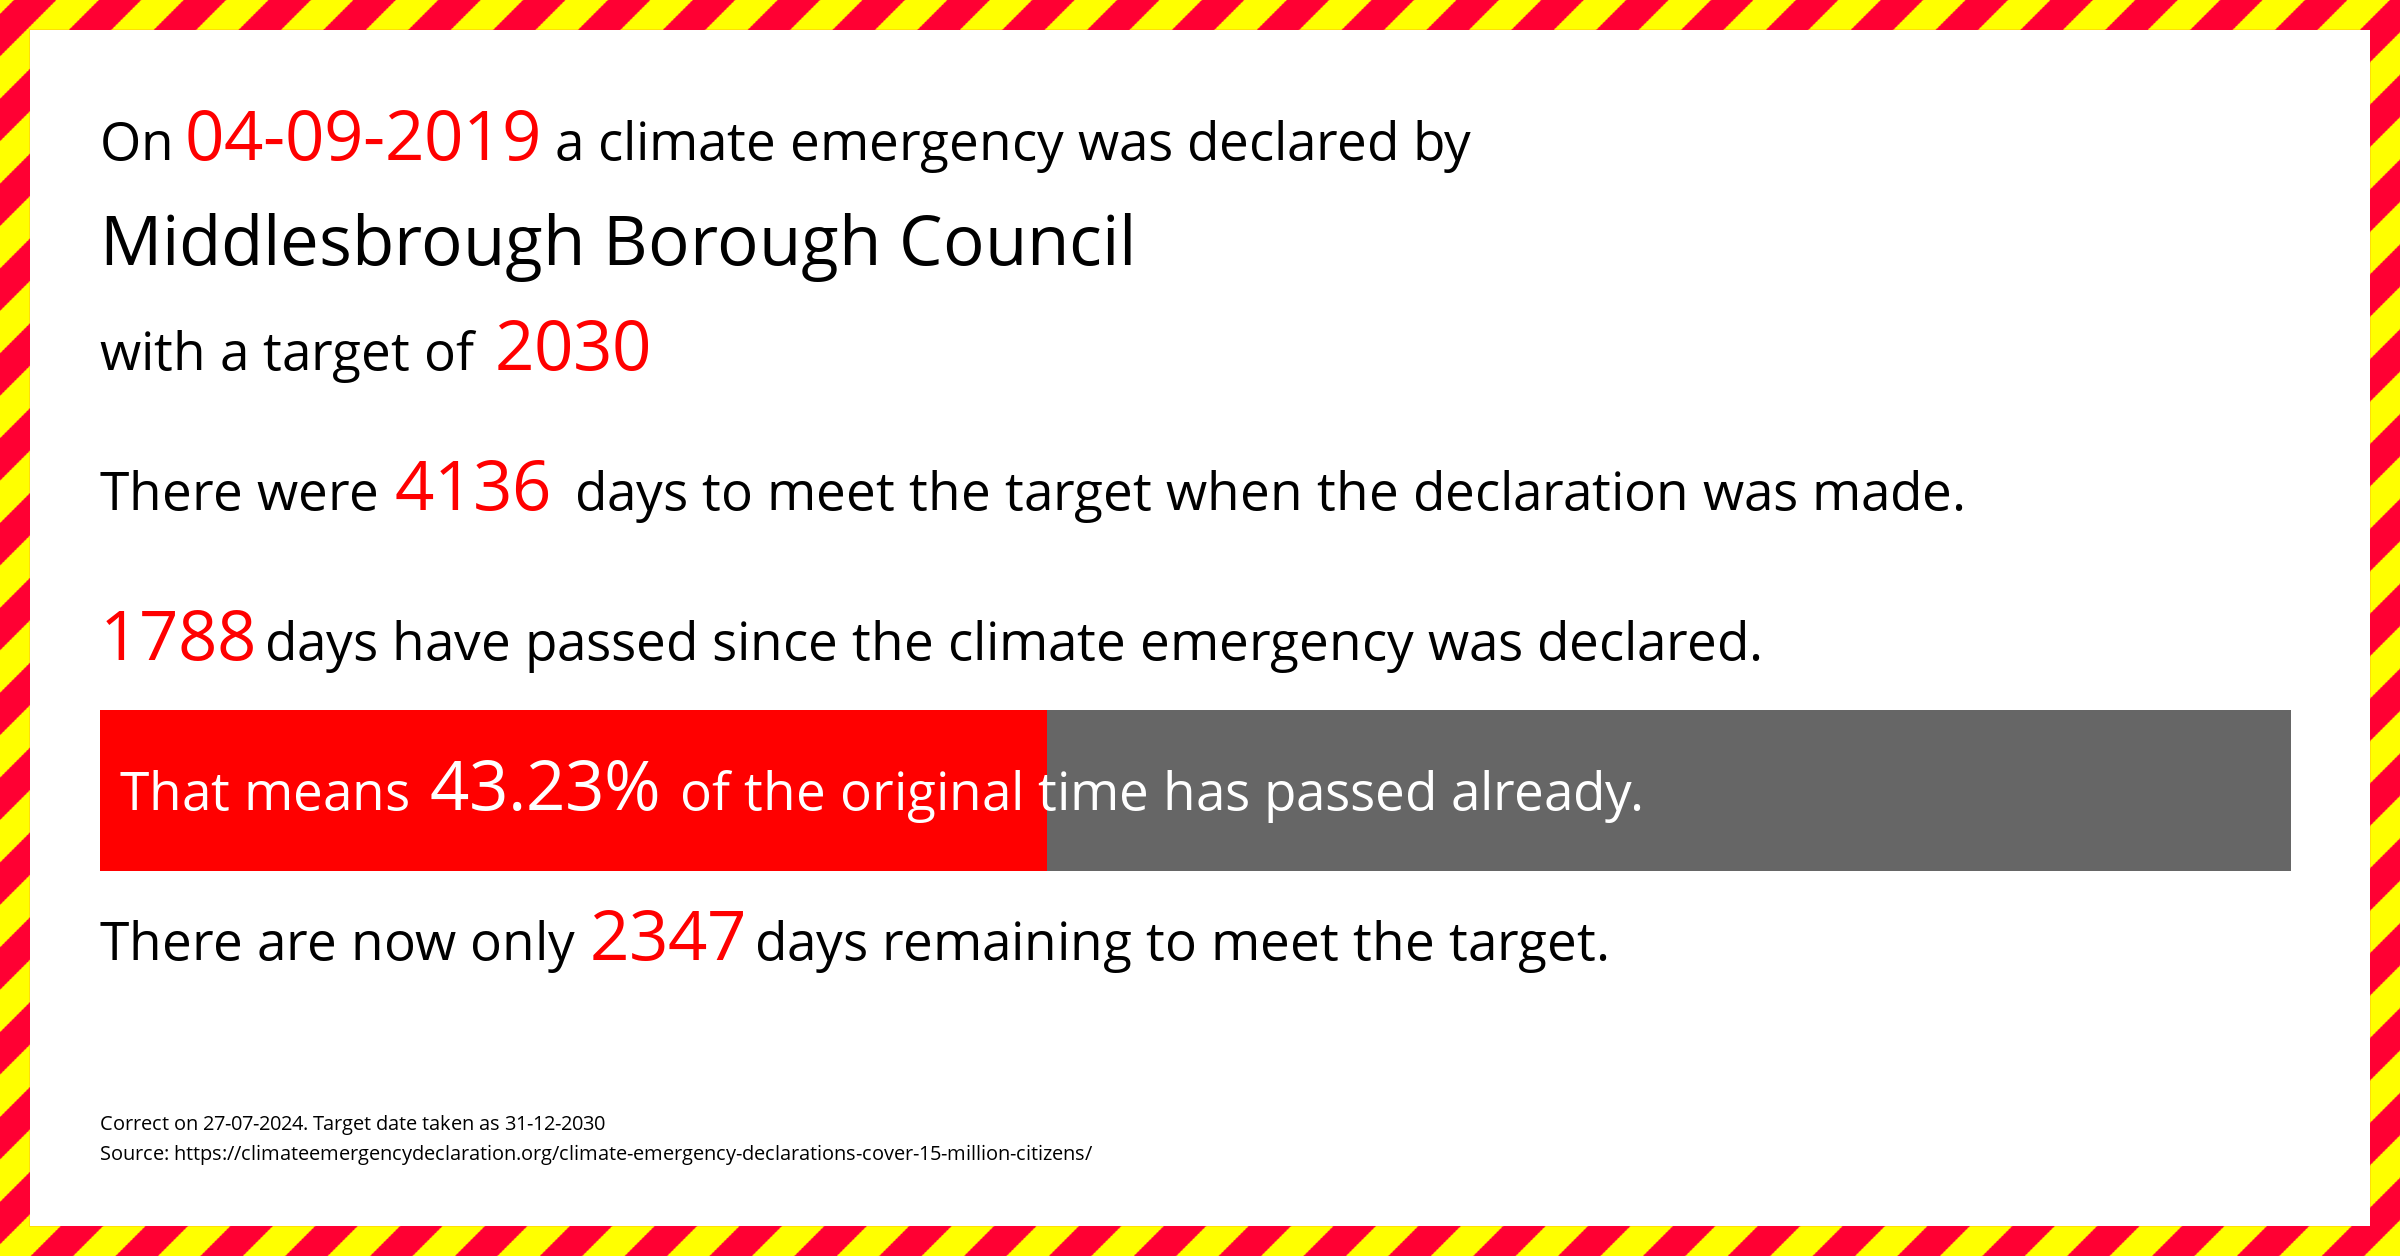 Middlesbrough Borough Council  declared a Climate emergency on Wednesday 4th September 2019, with a target of 2030.